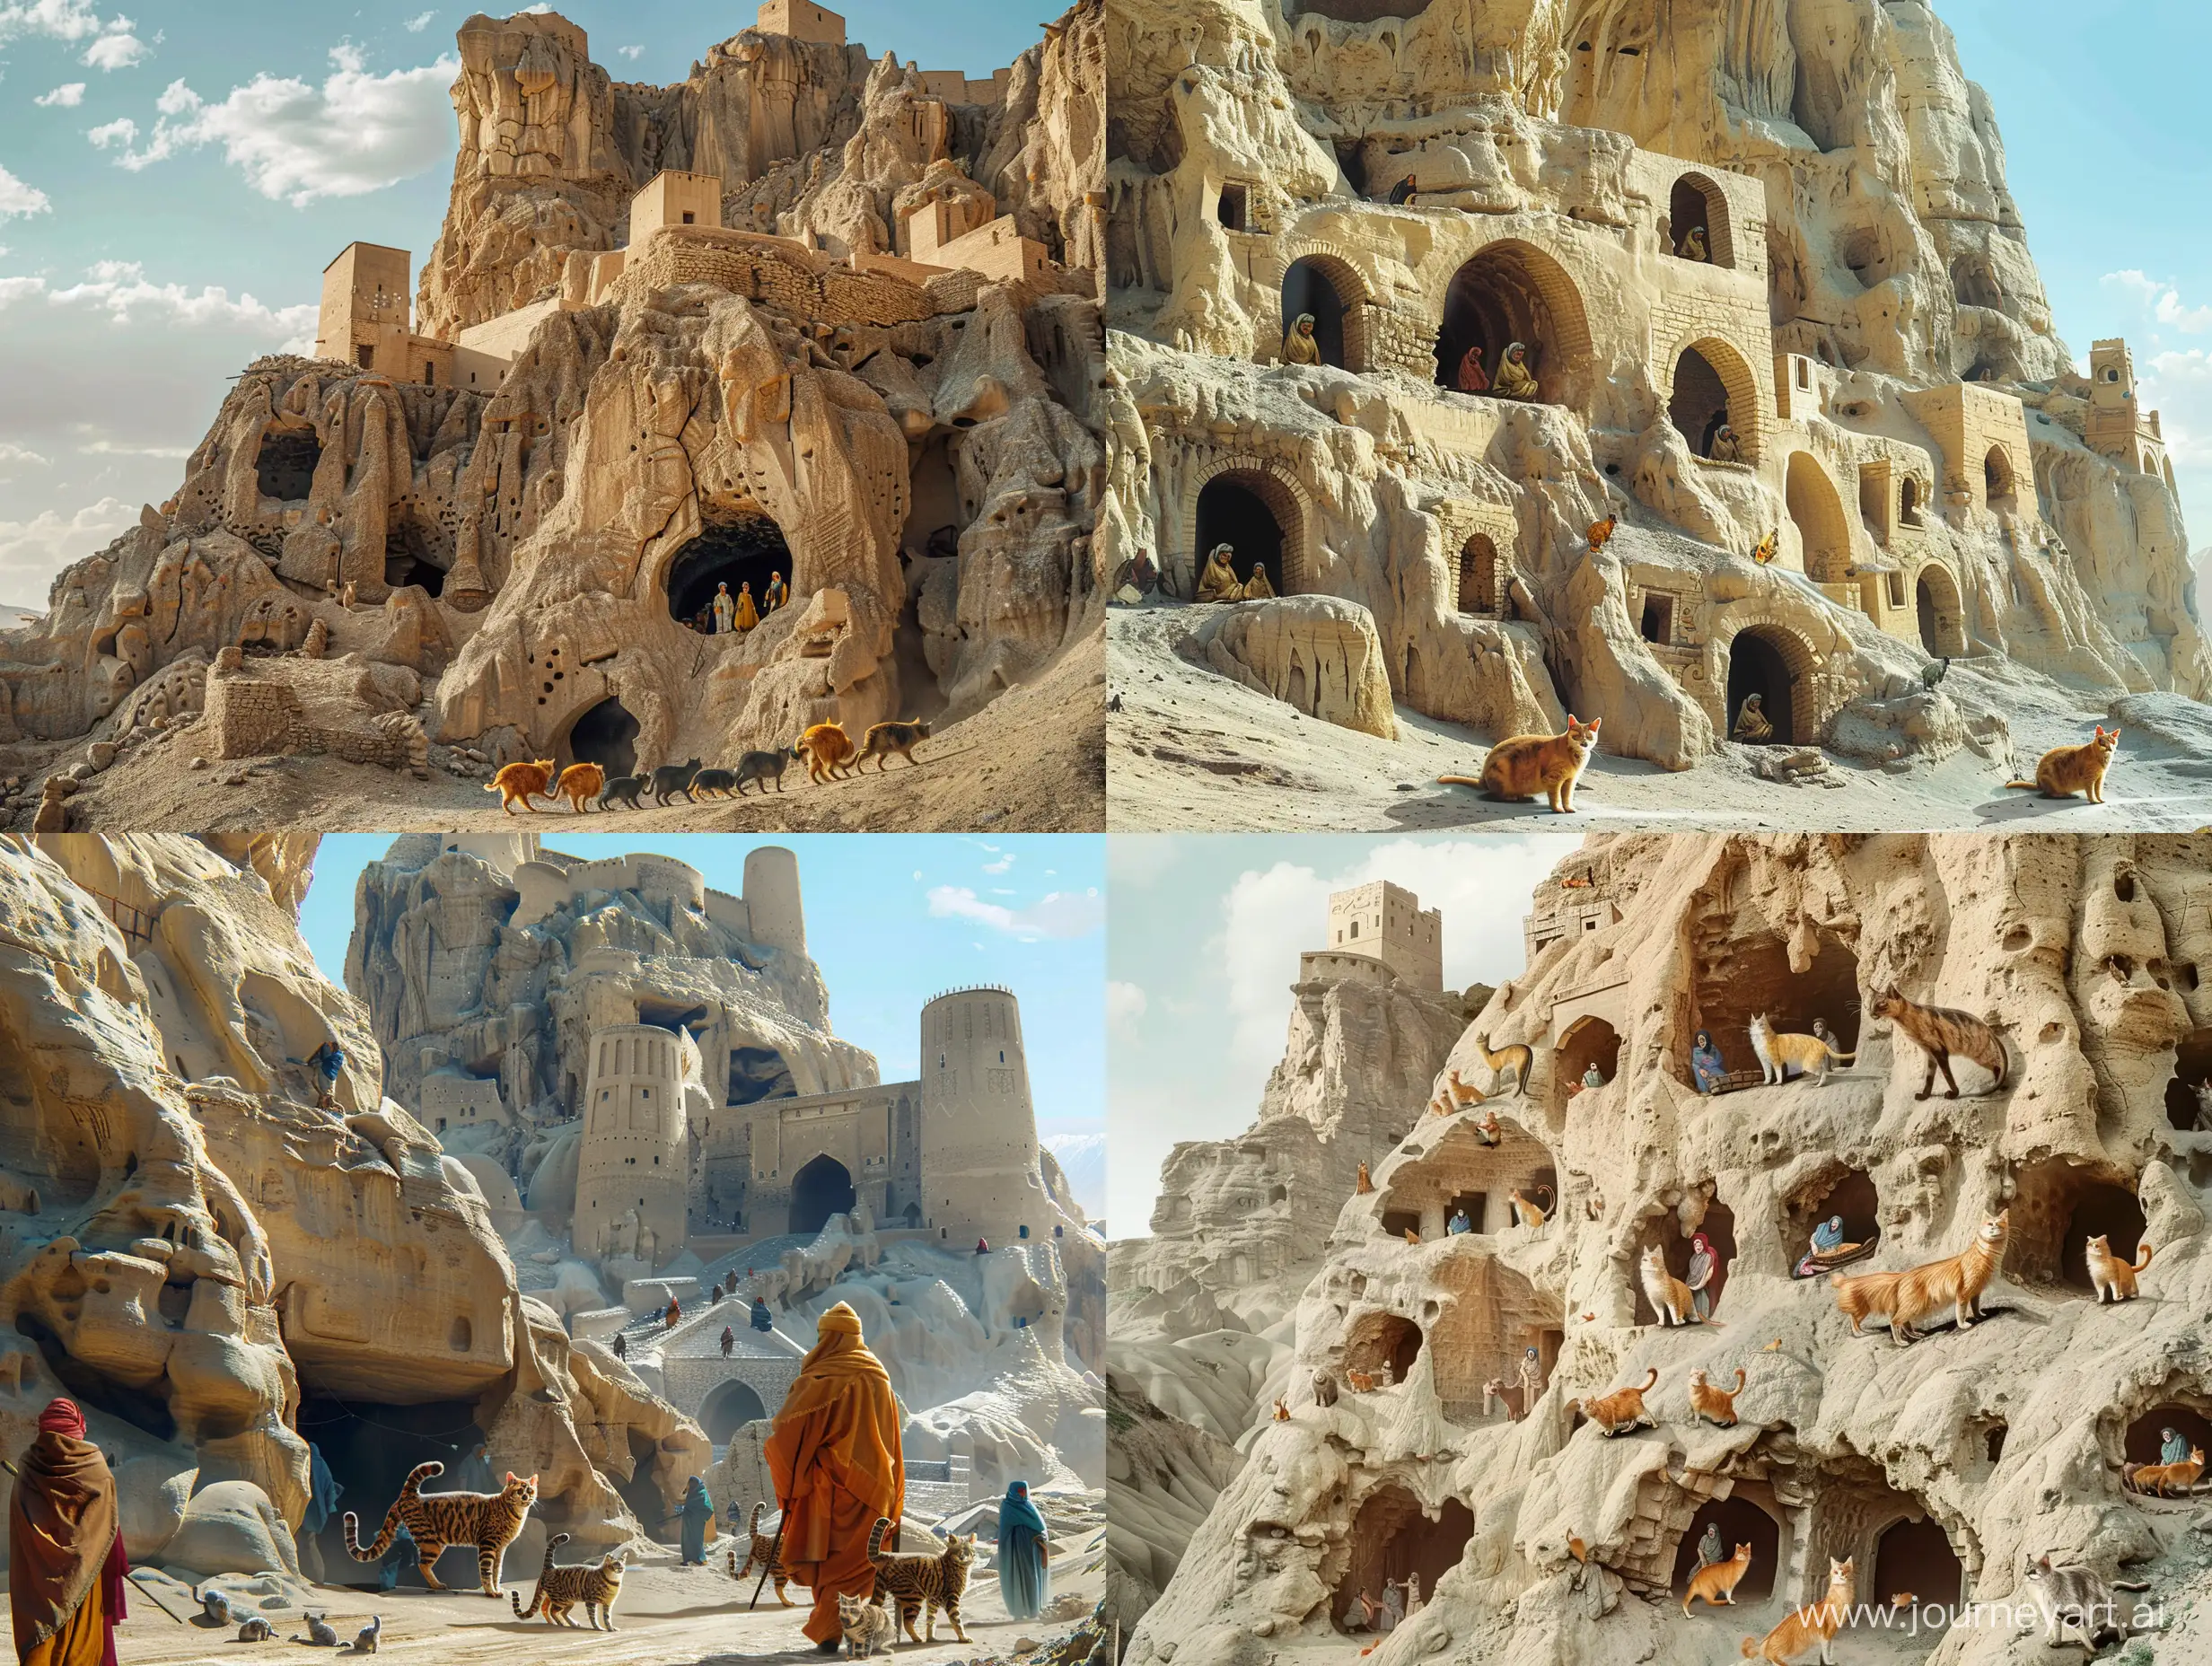 Miniature-People-of-Memand-Cats-as-Transport-in-Persian-Cave-Dwellings